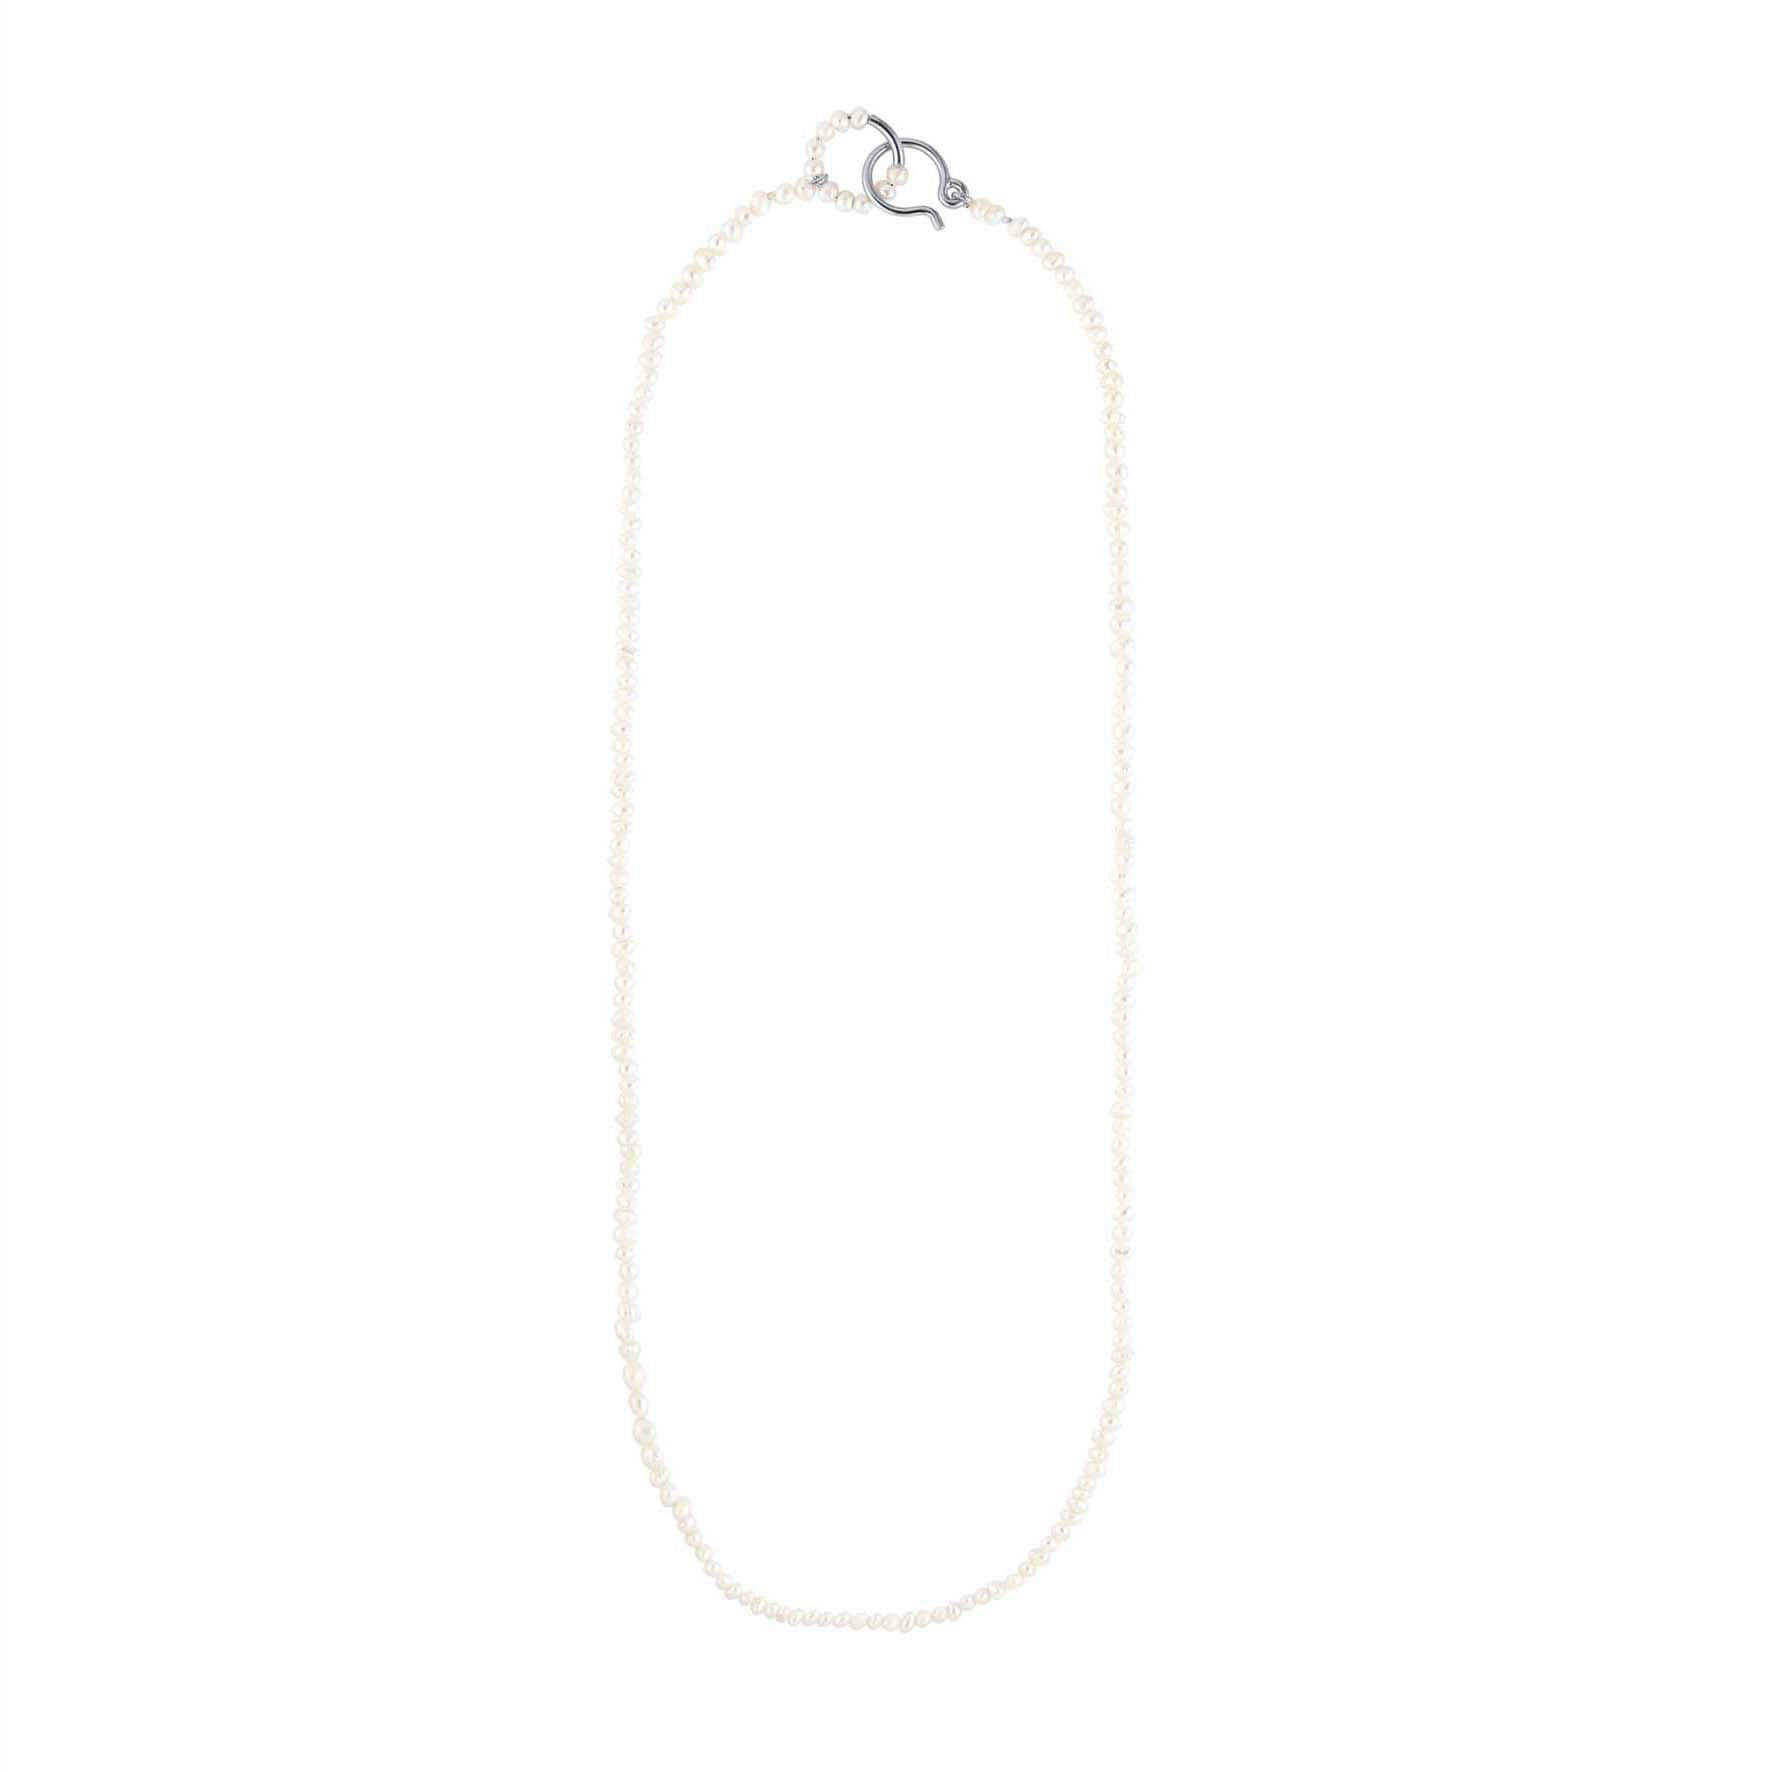 Row Pearl Necklace from Jane Kønig in Silver Sterling 925